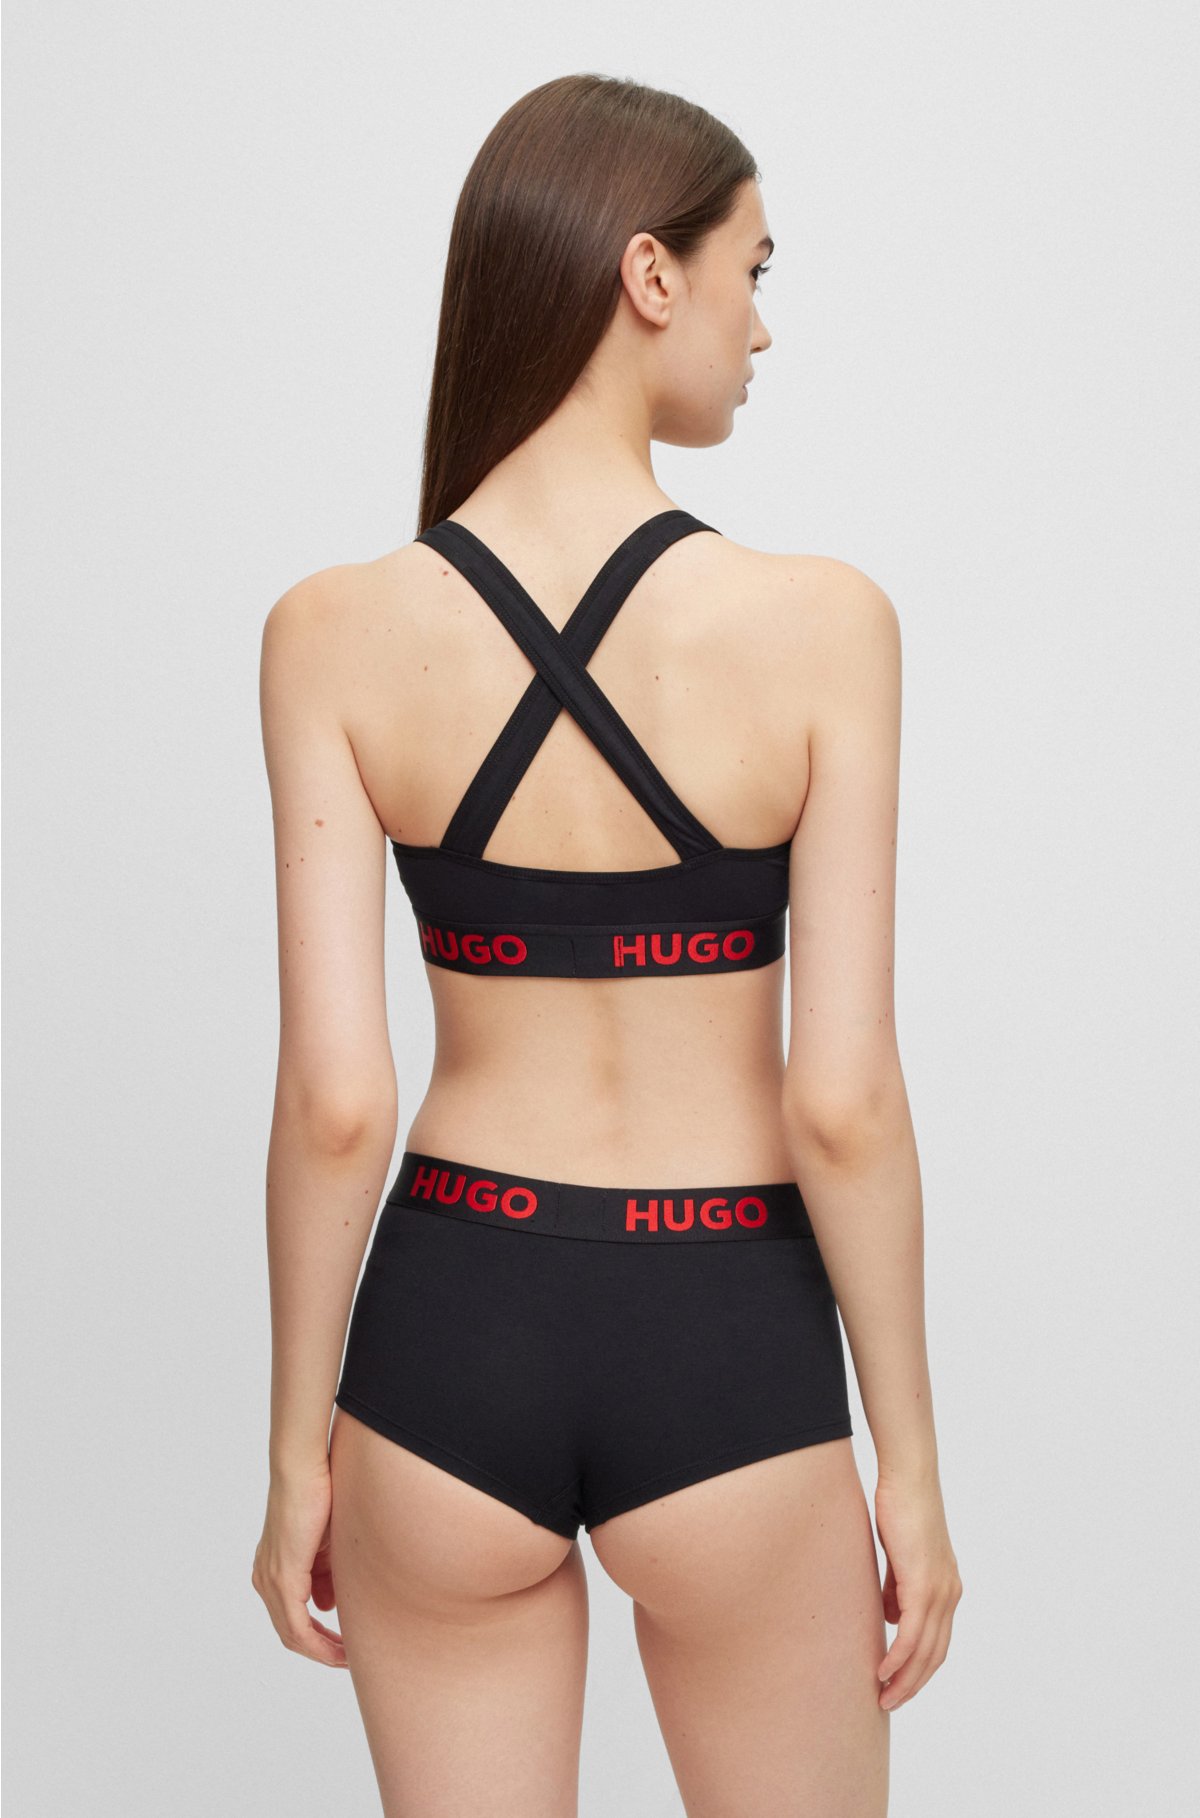 Sports with repeat bra logos HUGO cotton - stretch in